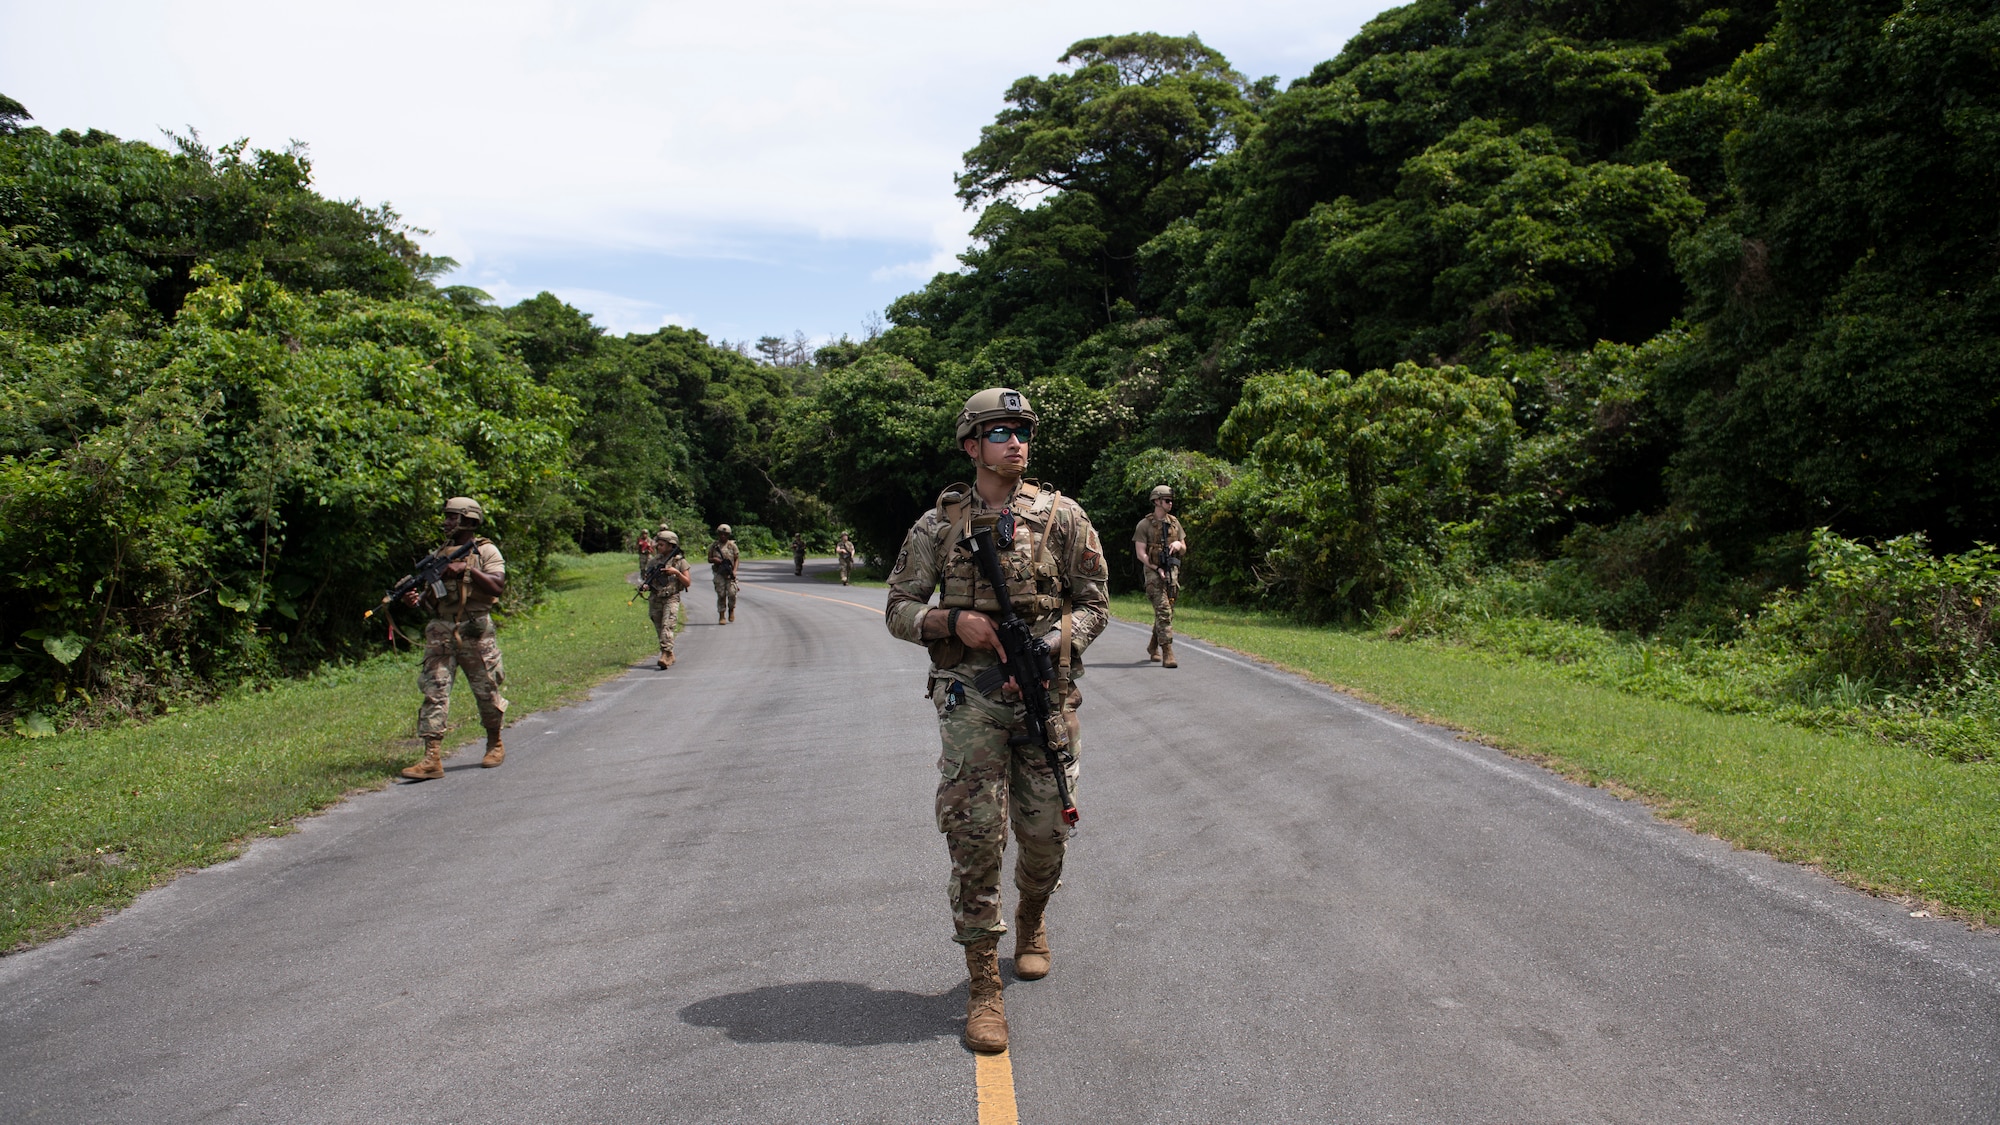 U.S. Air Force Airmen assigned to the 18th Security Forces Squadron patrol an area in a staggered column formation during a field training exercise at Kadena Air Base, Japan, April 27, 2022. The staggered column is a common military formation where squad members walk in a zig-zag pattern, often while traveling along open roads. (U.S. Air Force photo by Senior Airman Jessi Monte)